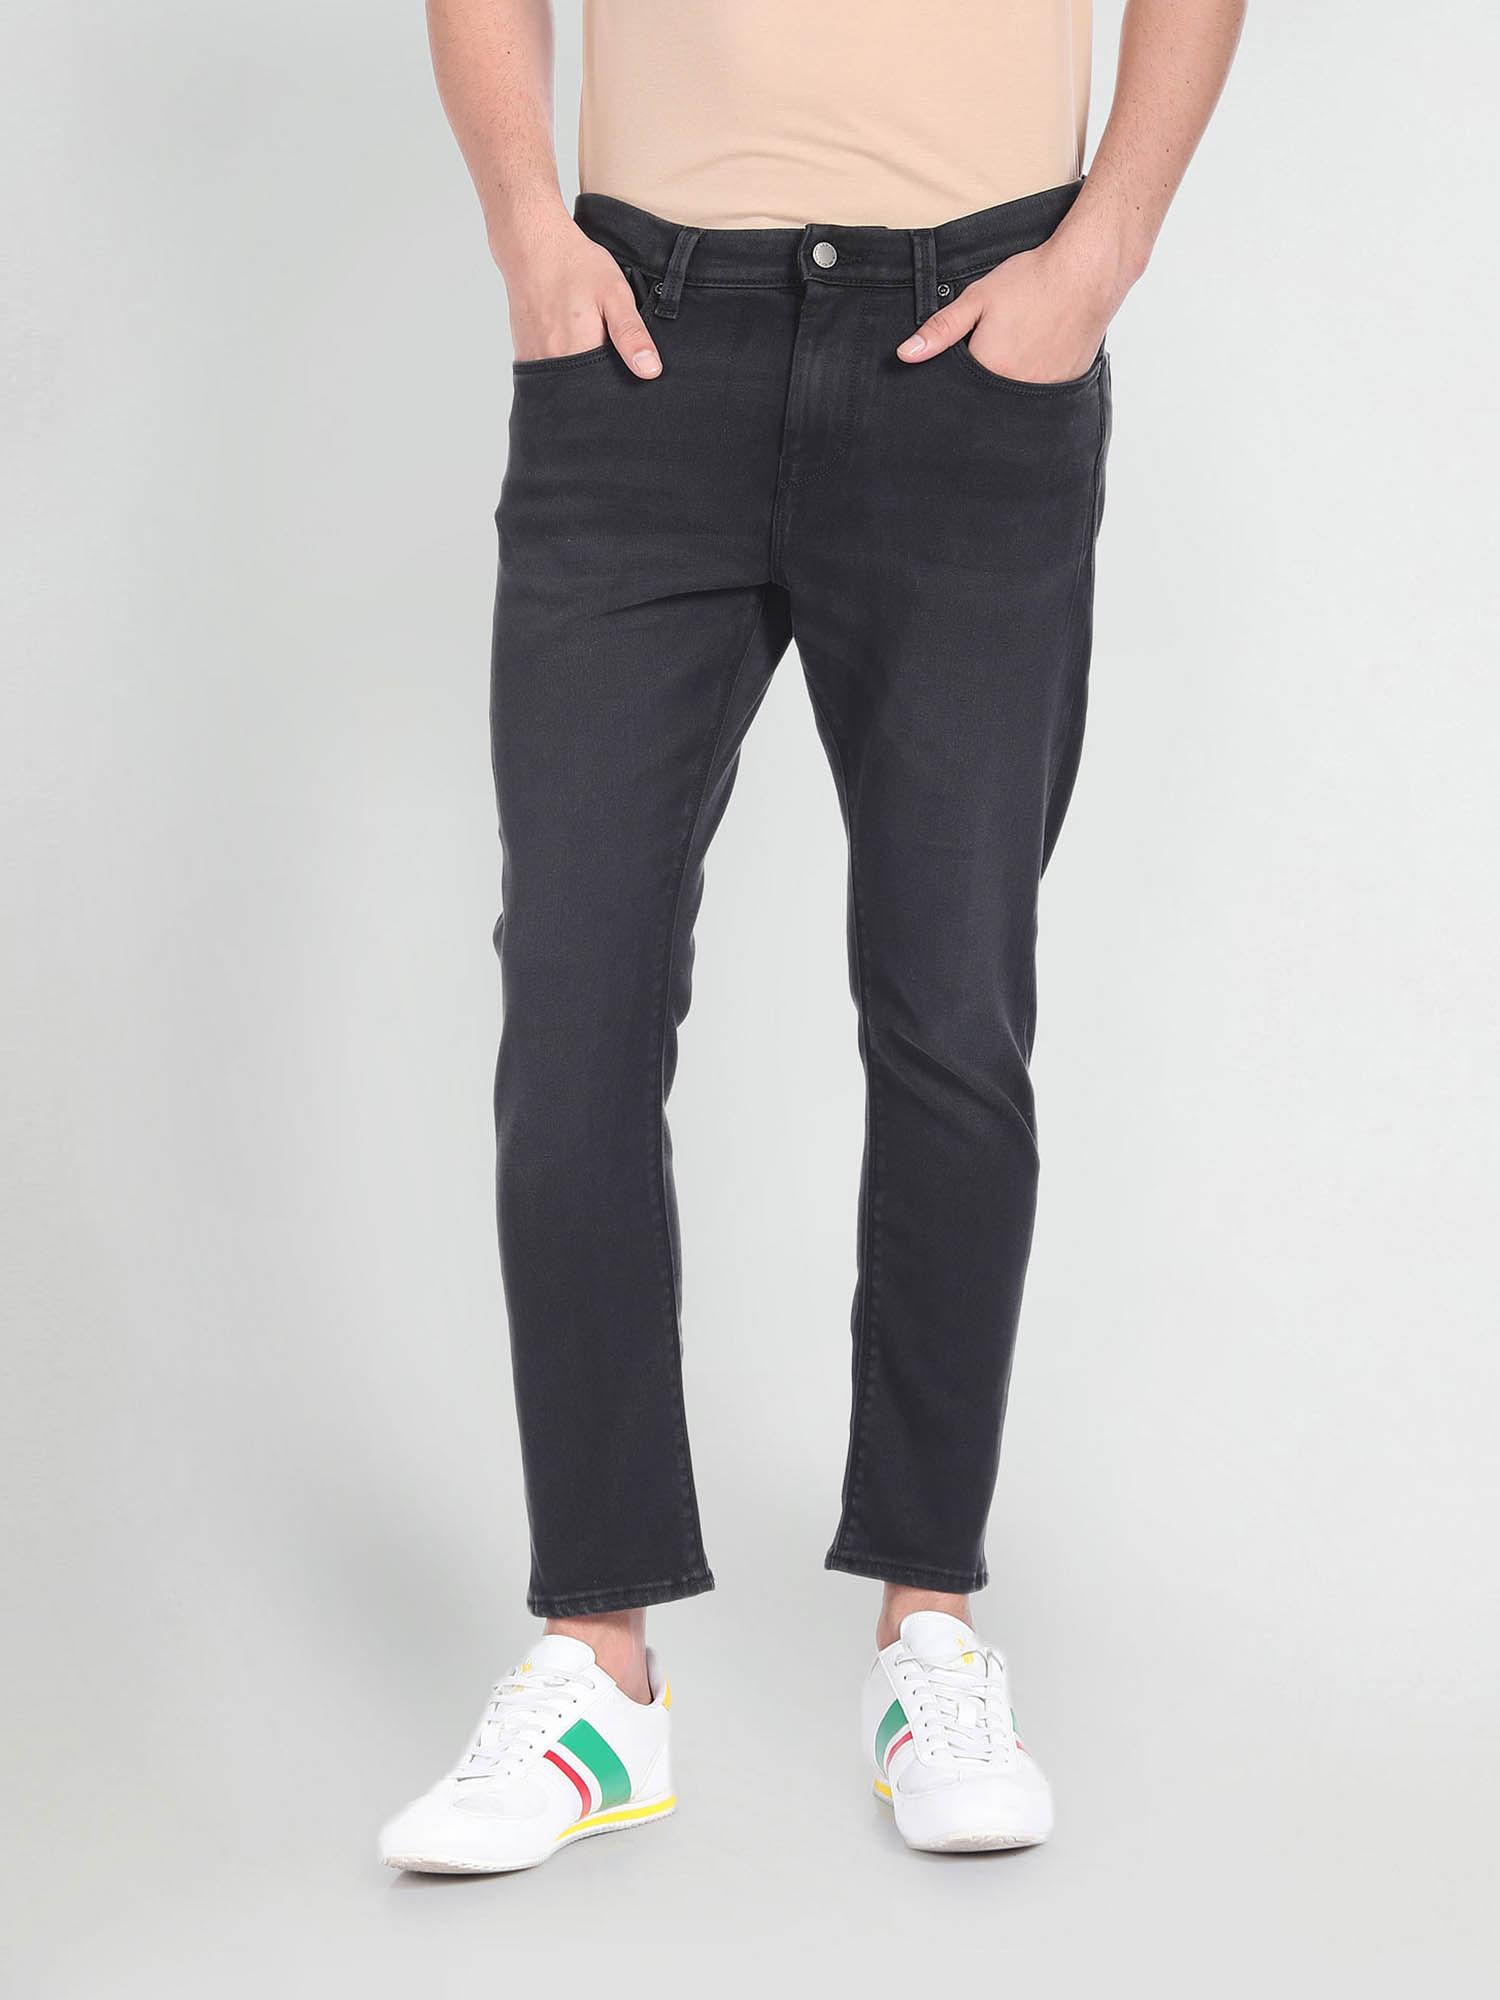 henry-cropped-black-jeans